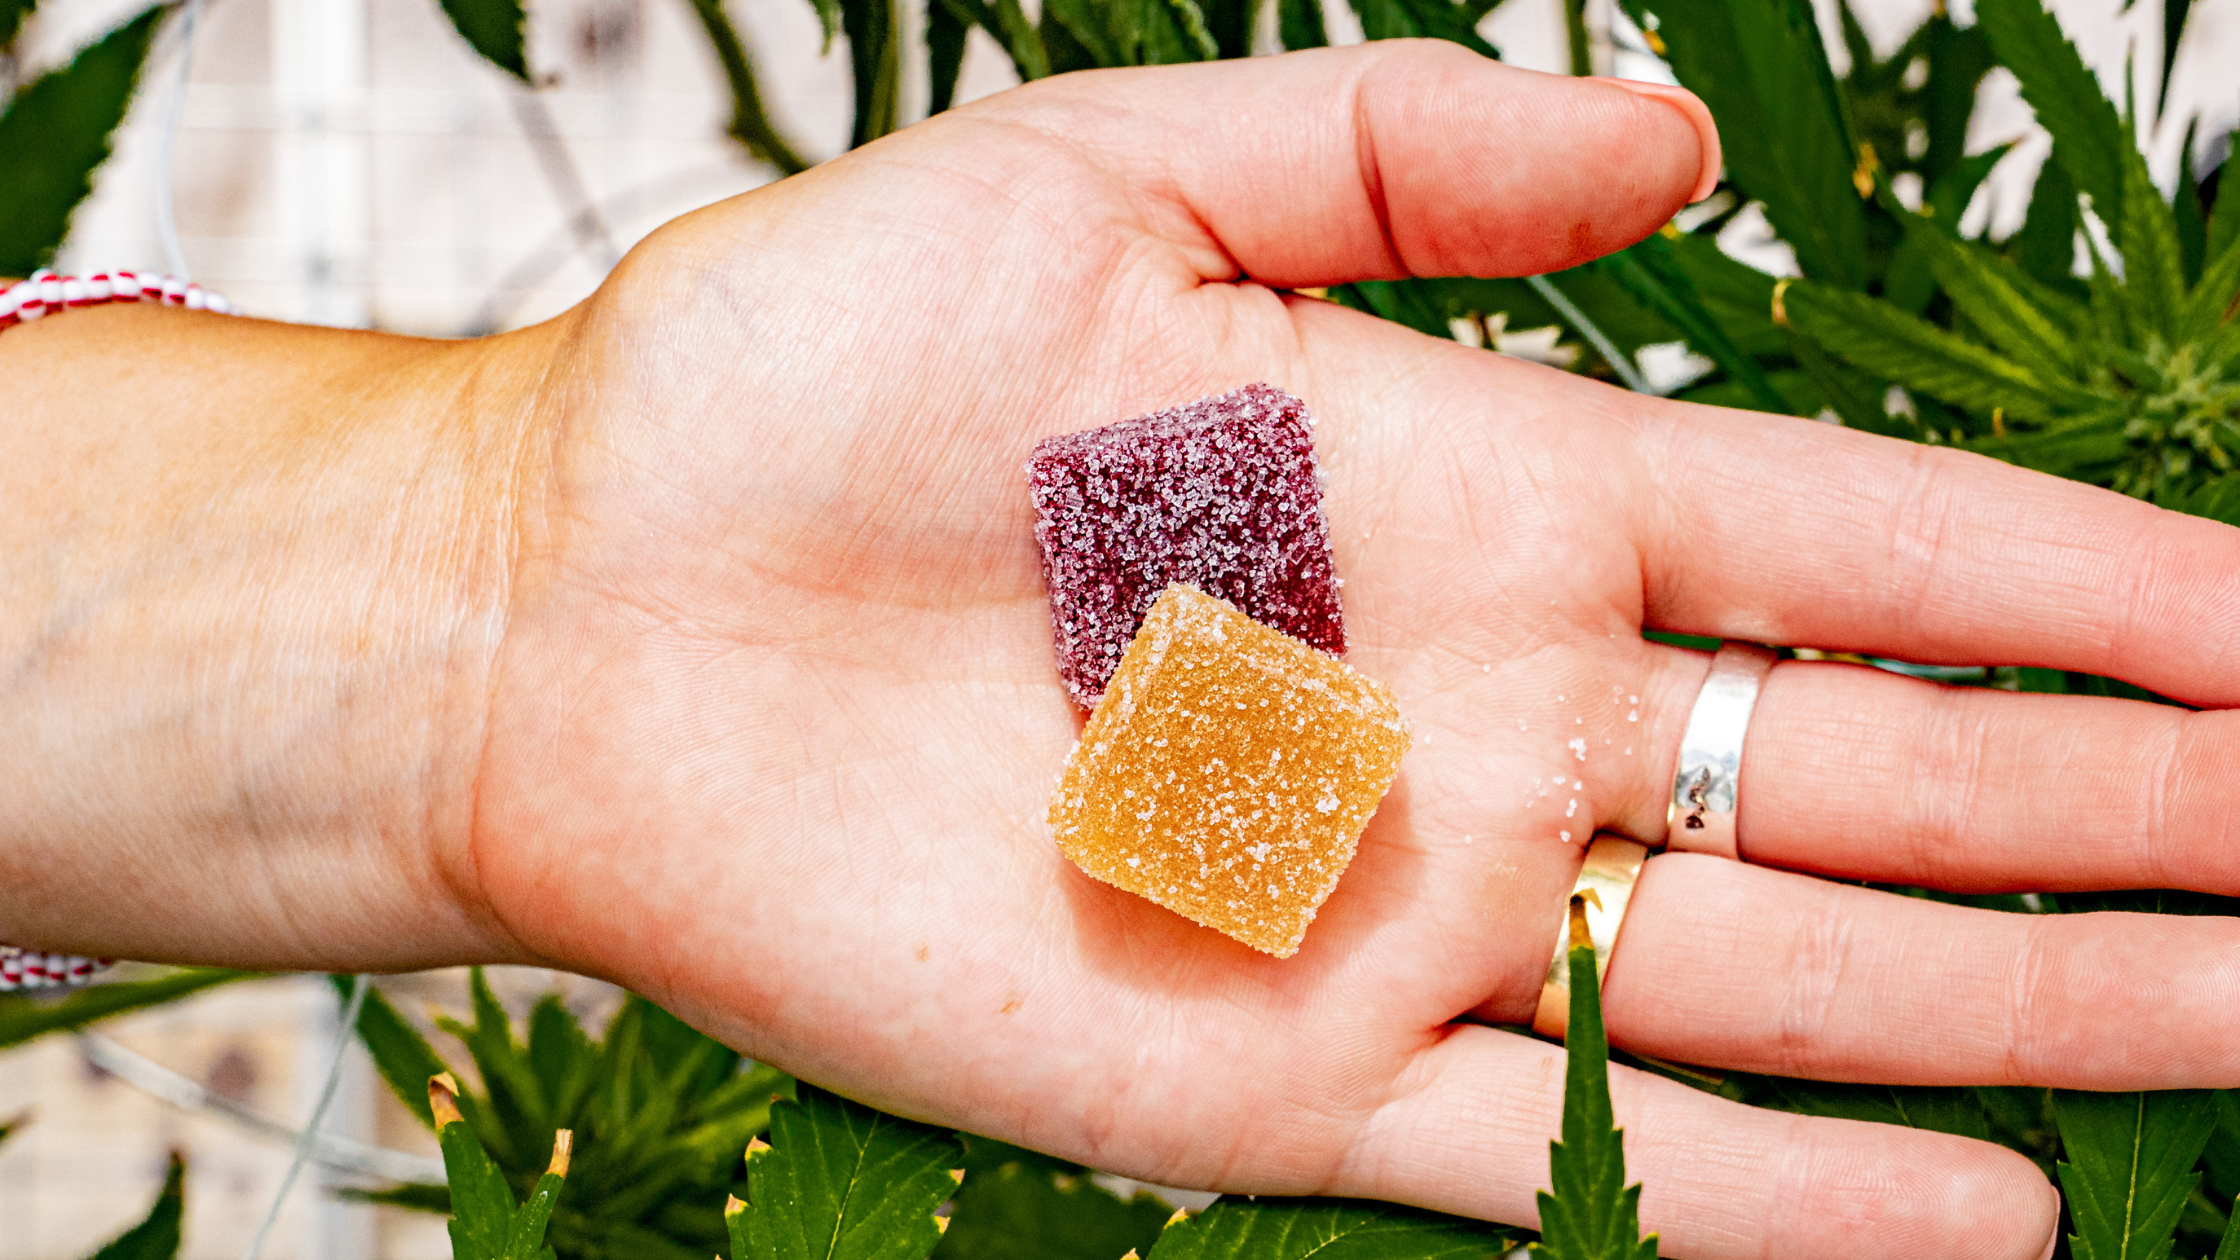 What's the average shelf life of cannabis edibles?